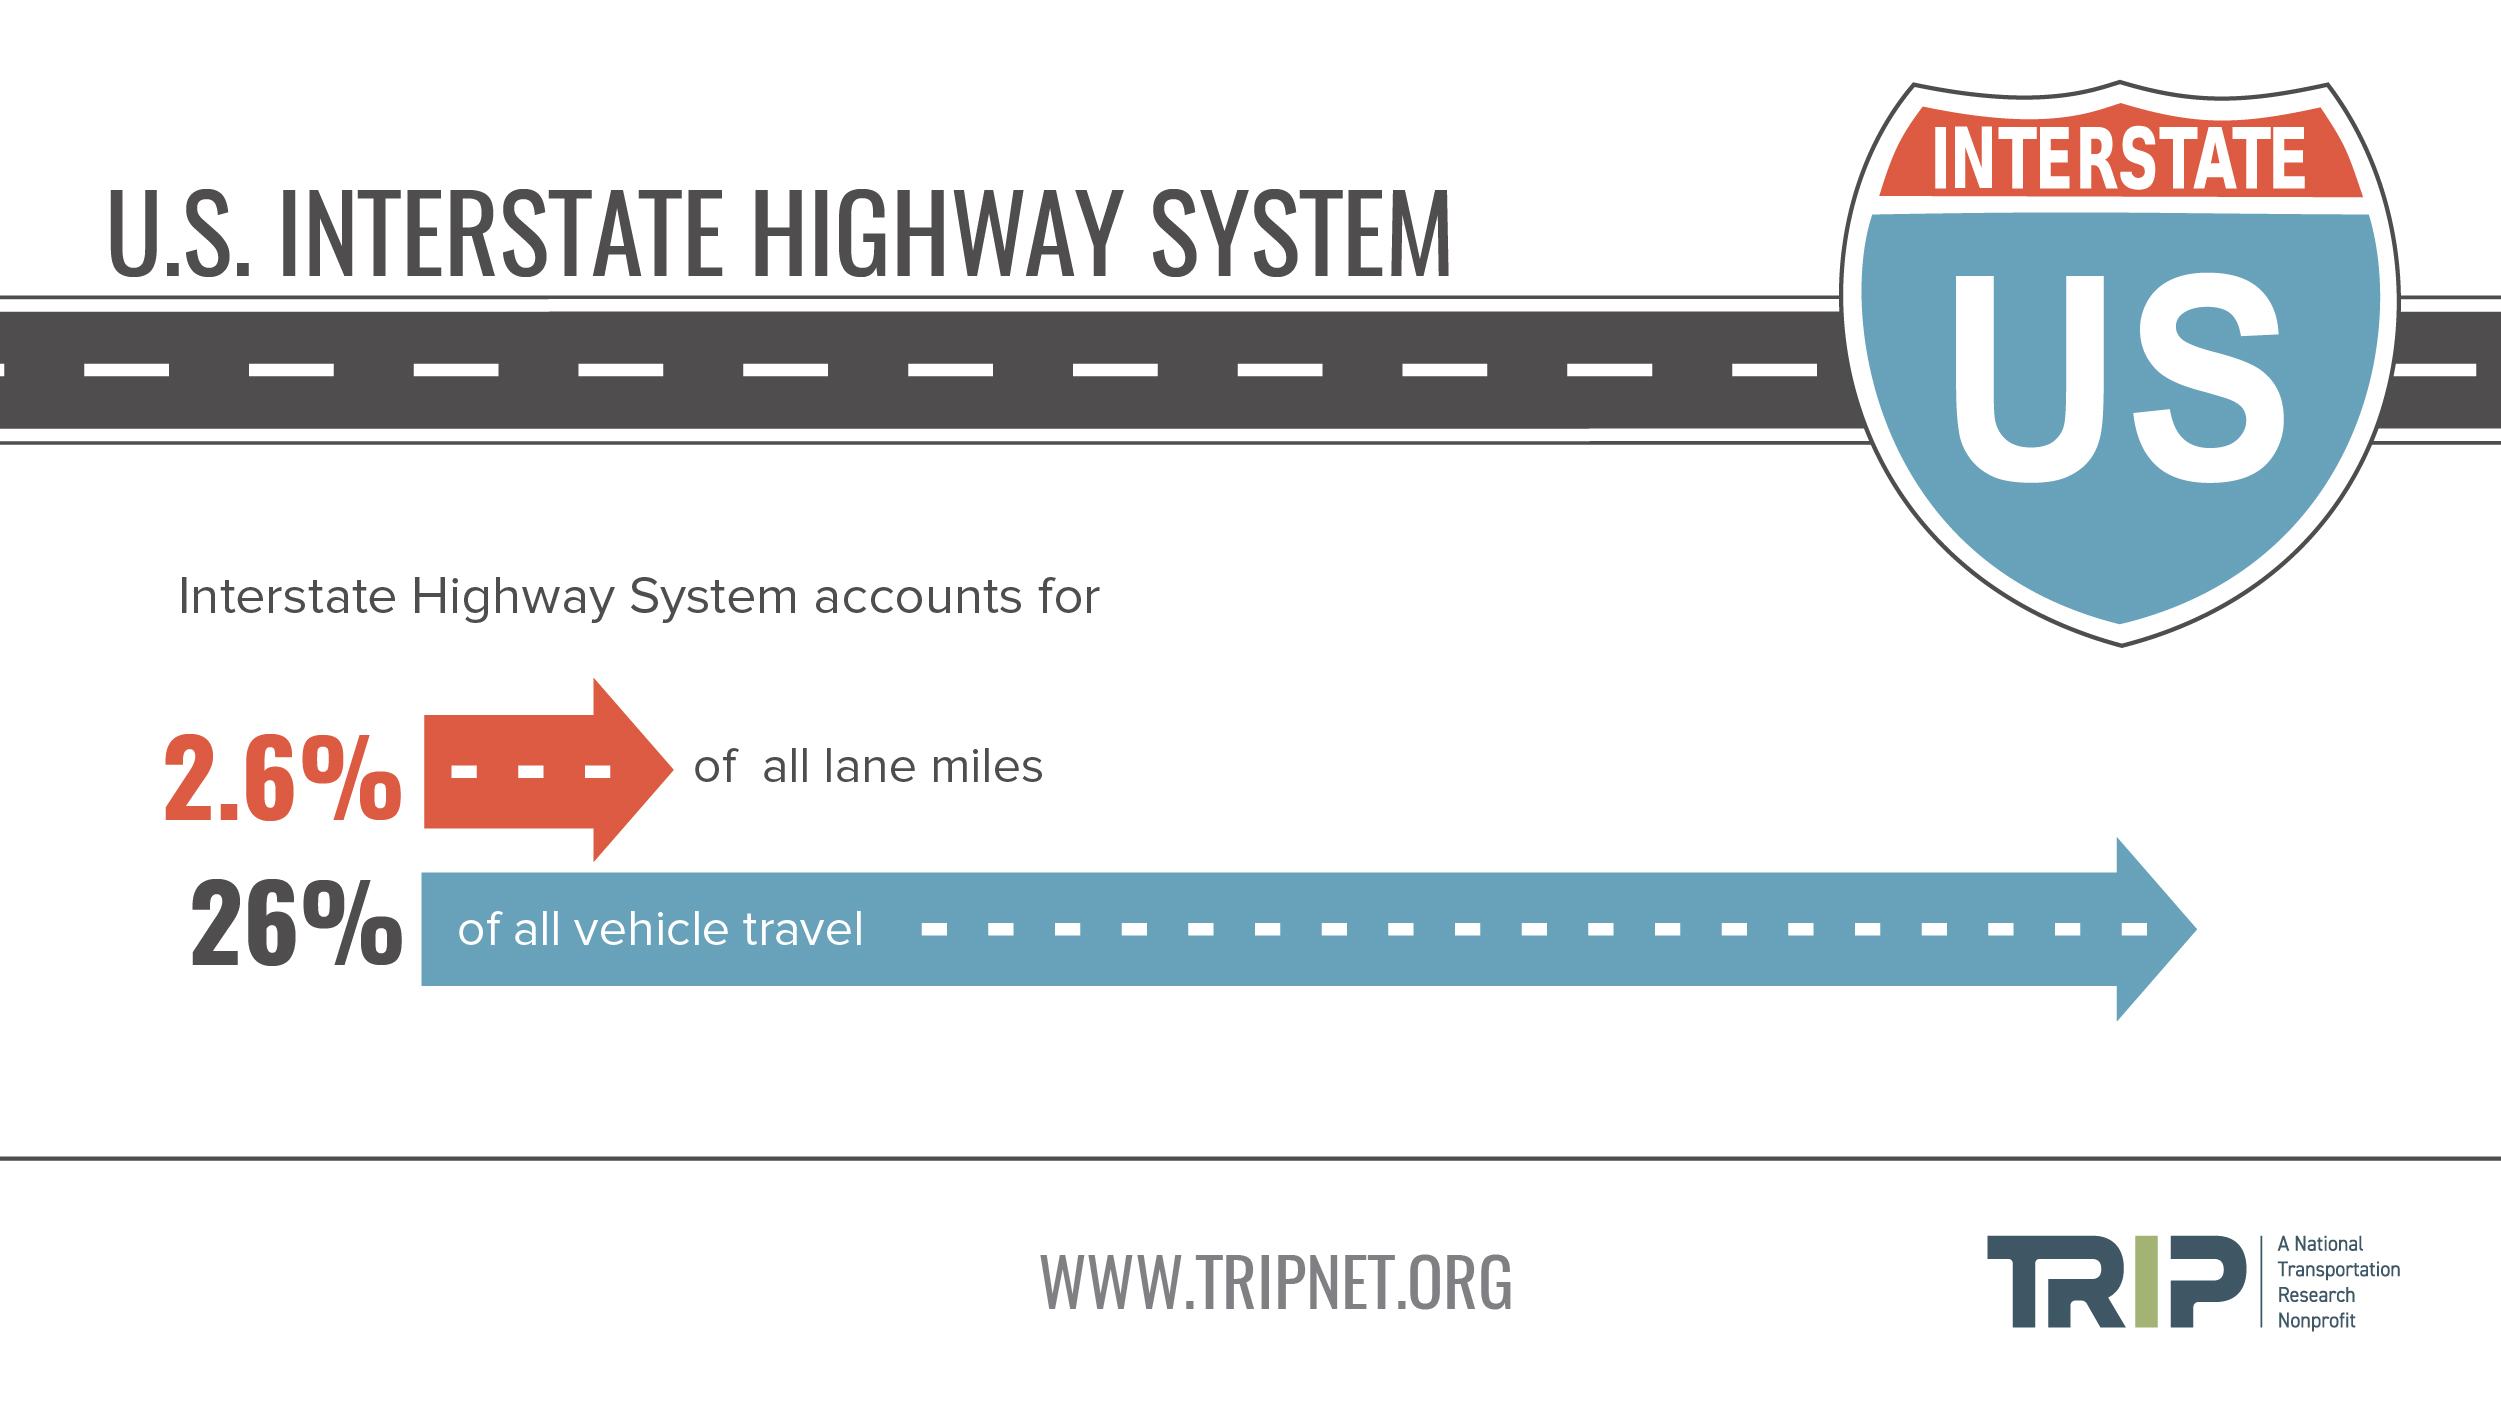 Interstate Travel and Lane Miles – June 2021